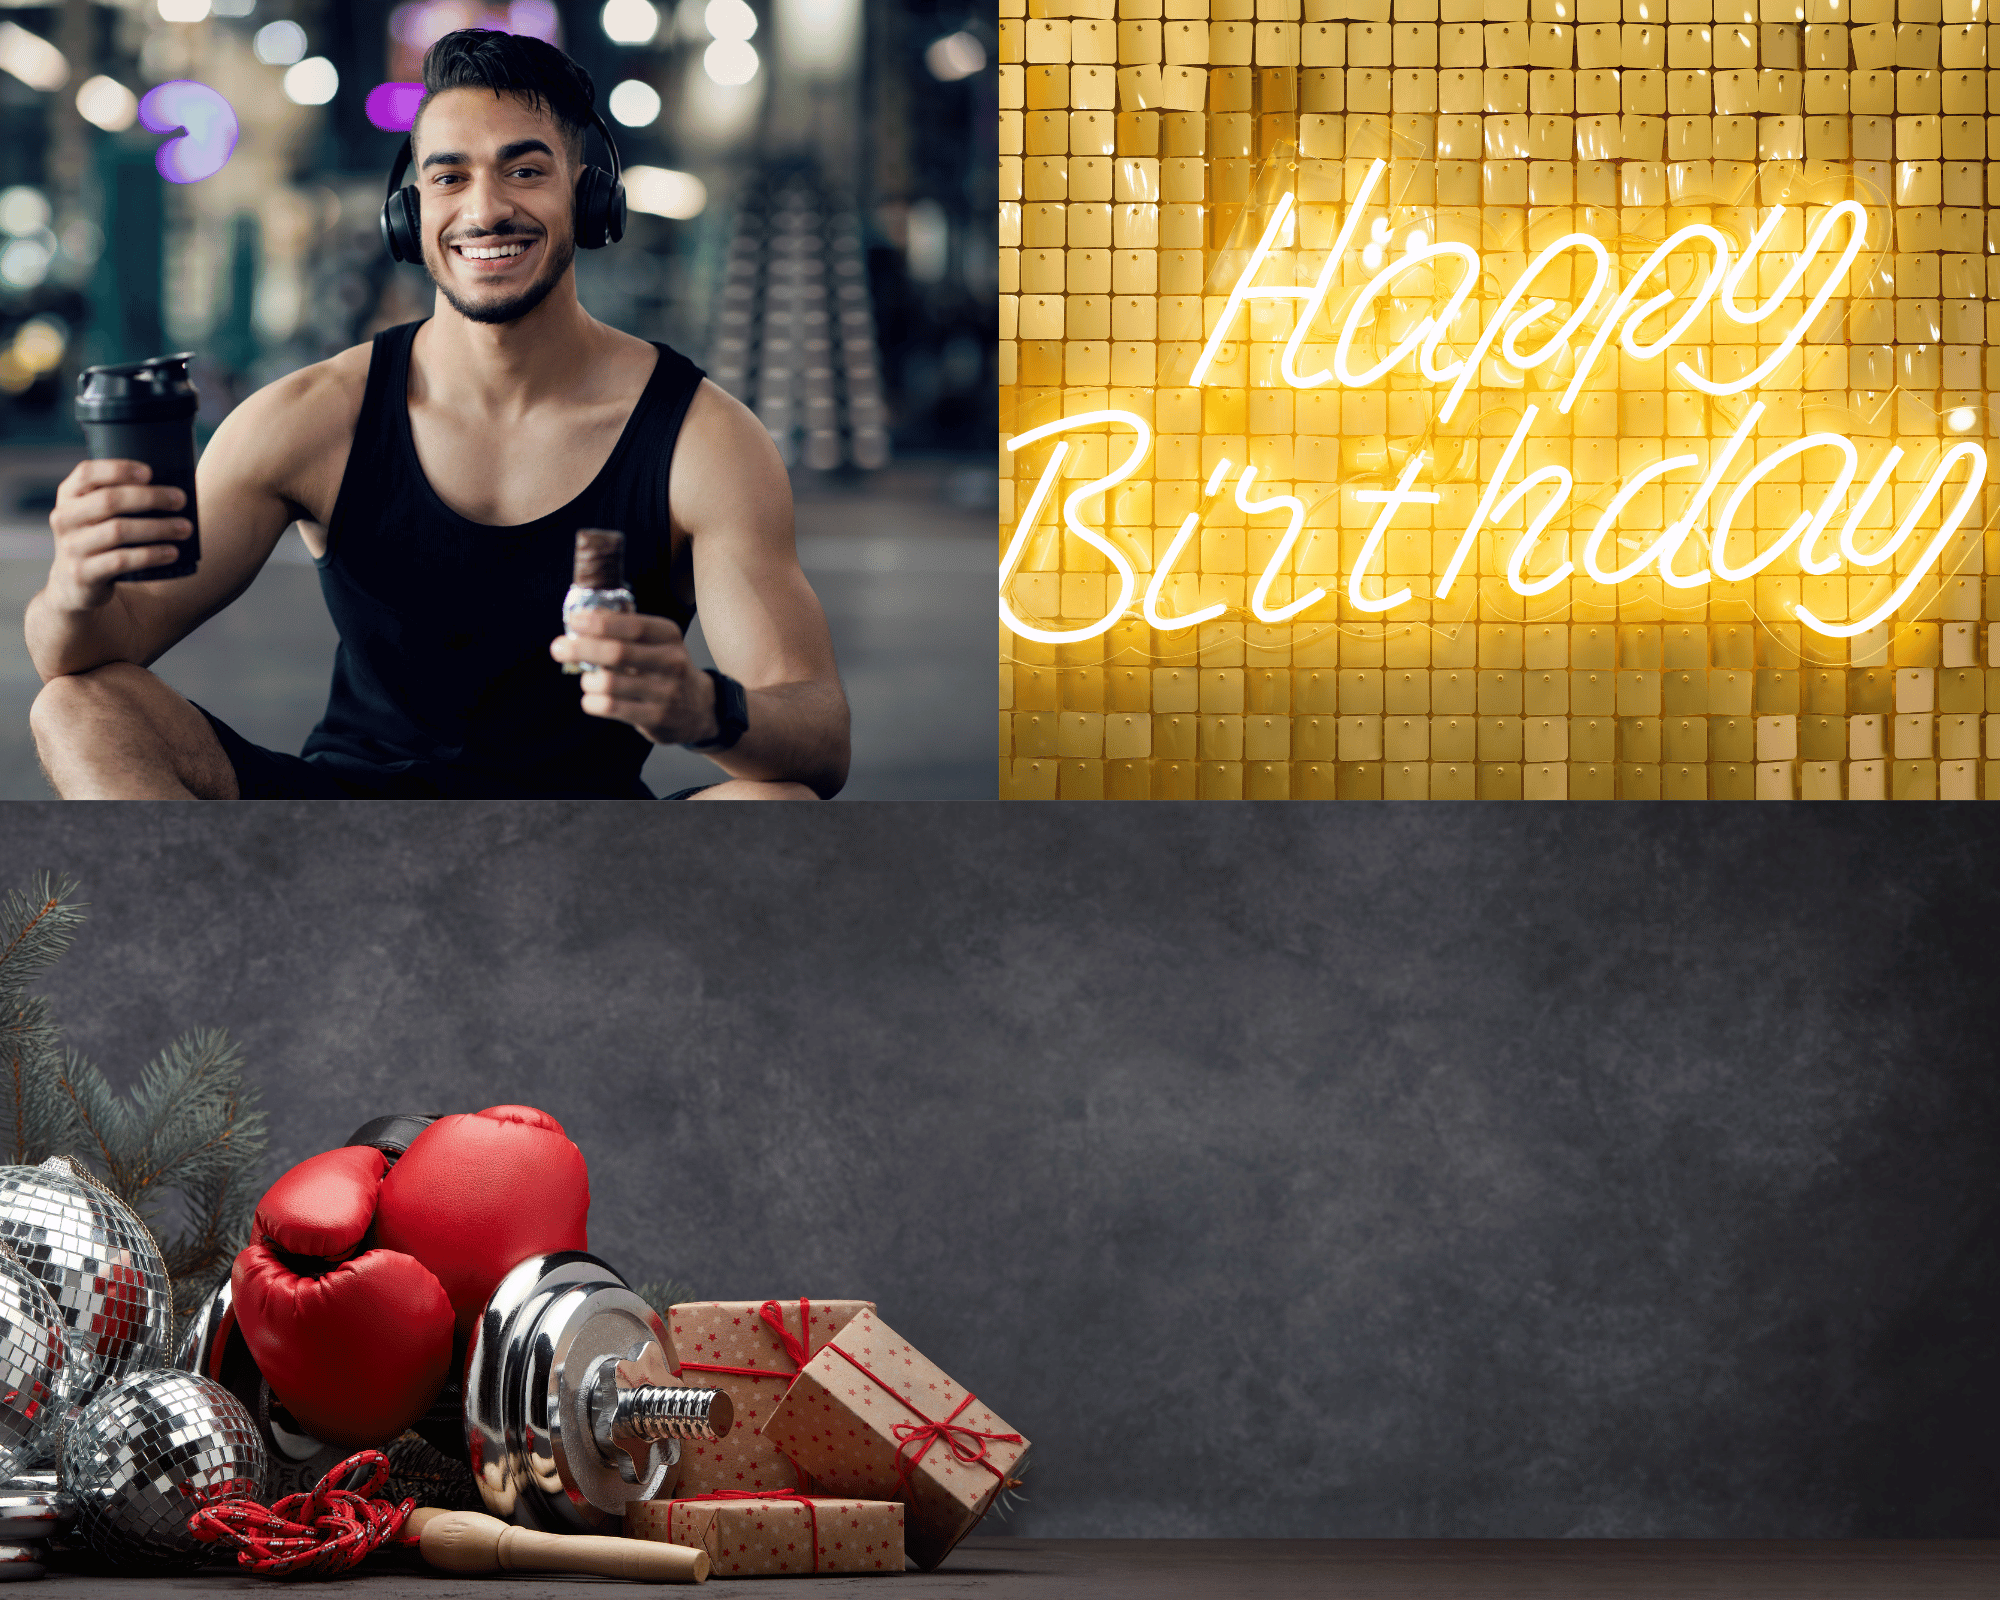 The Best Sports & Fitness Birthday Gifts for 19-Year-Old Males